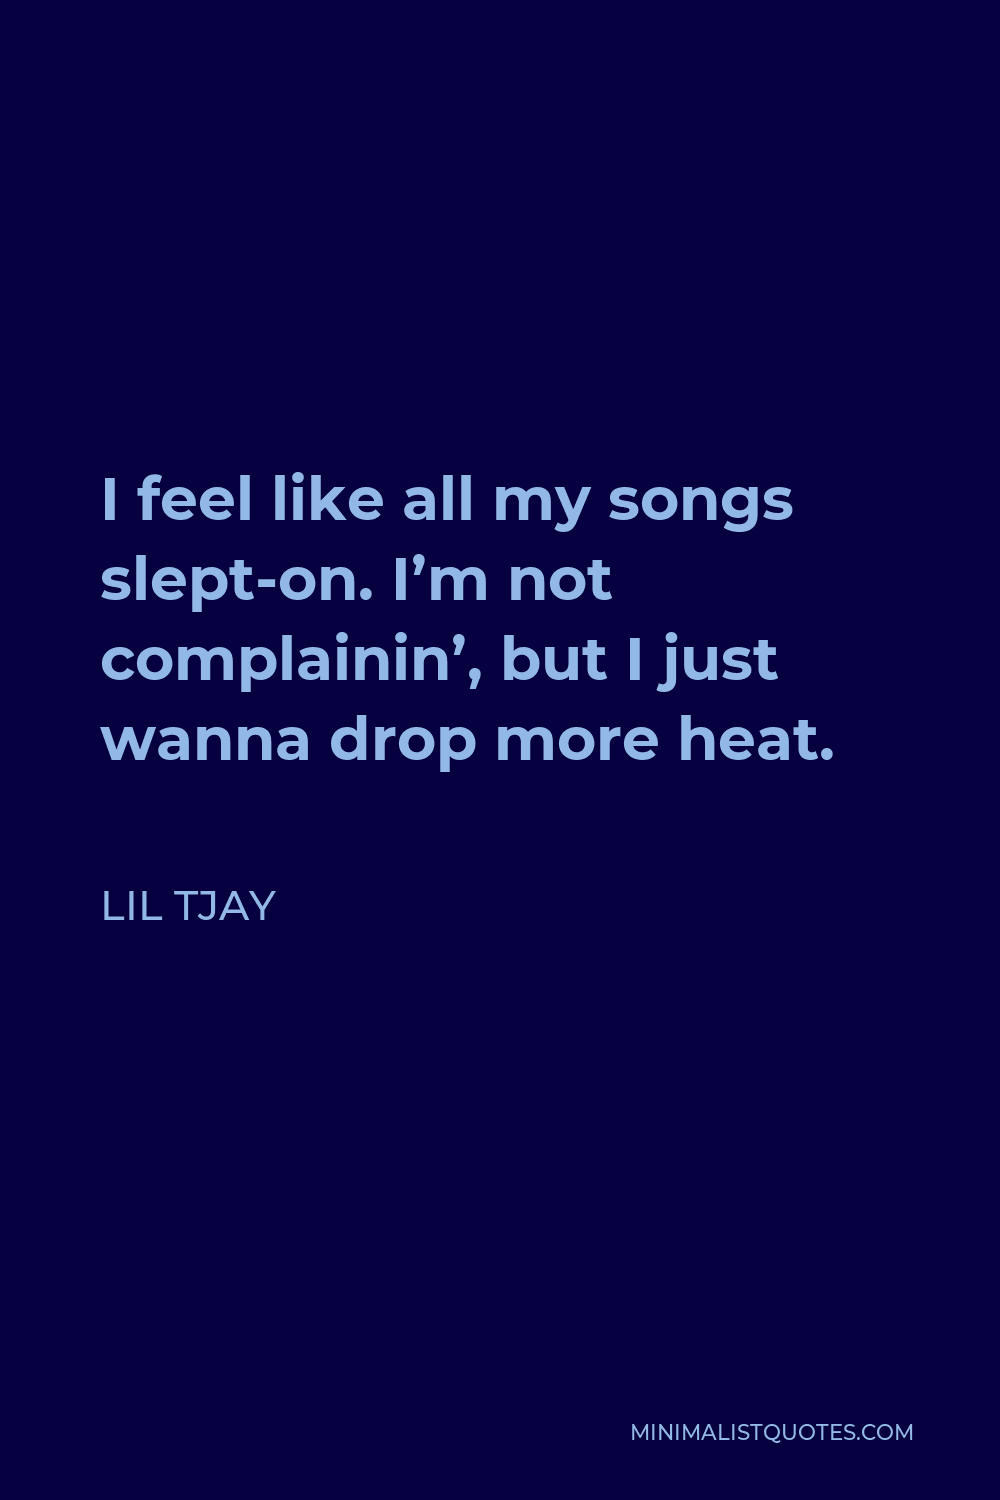 Lil Tjay Quote - I feel like all my songs slept-on. I’m not complainin’, but I just wanna drop more heat.